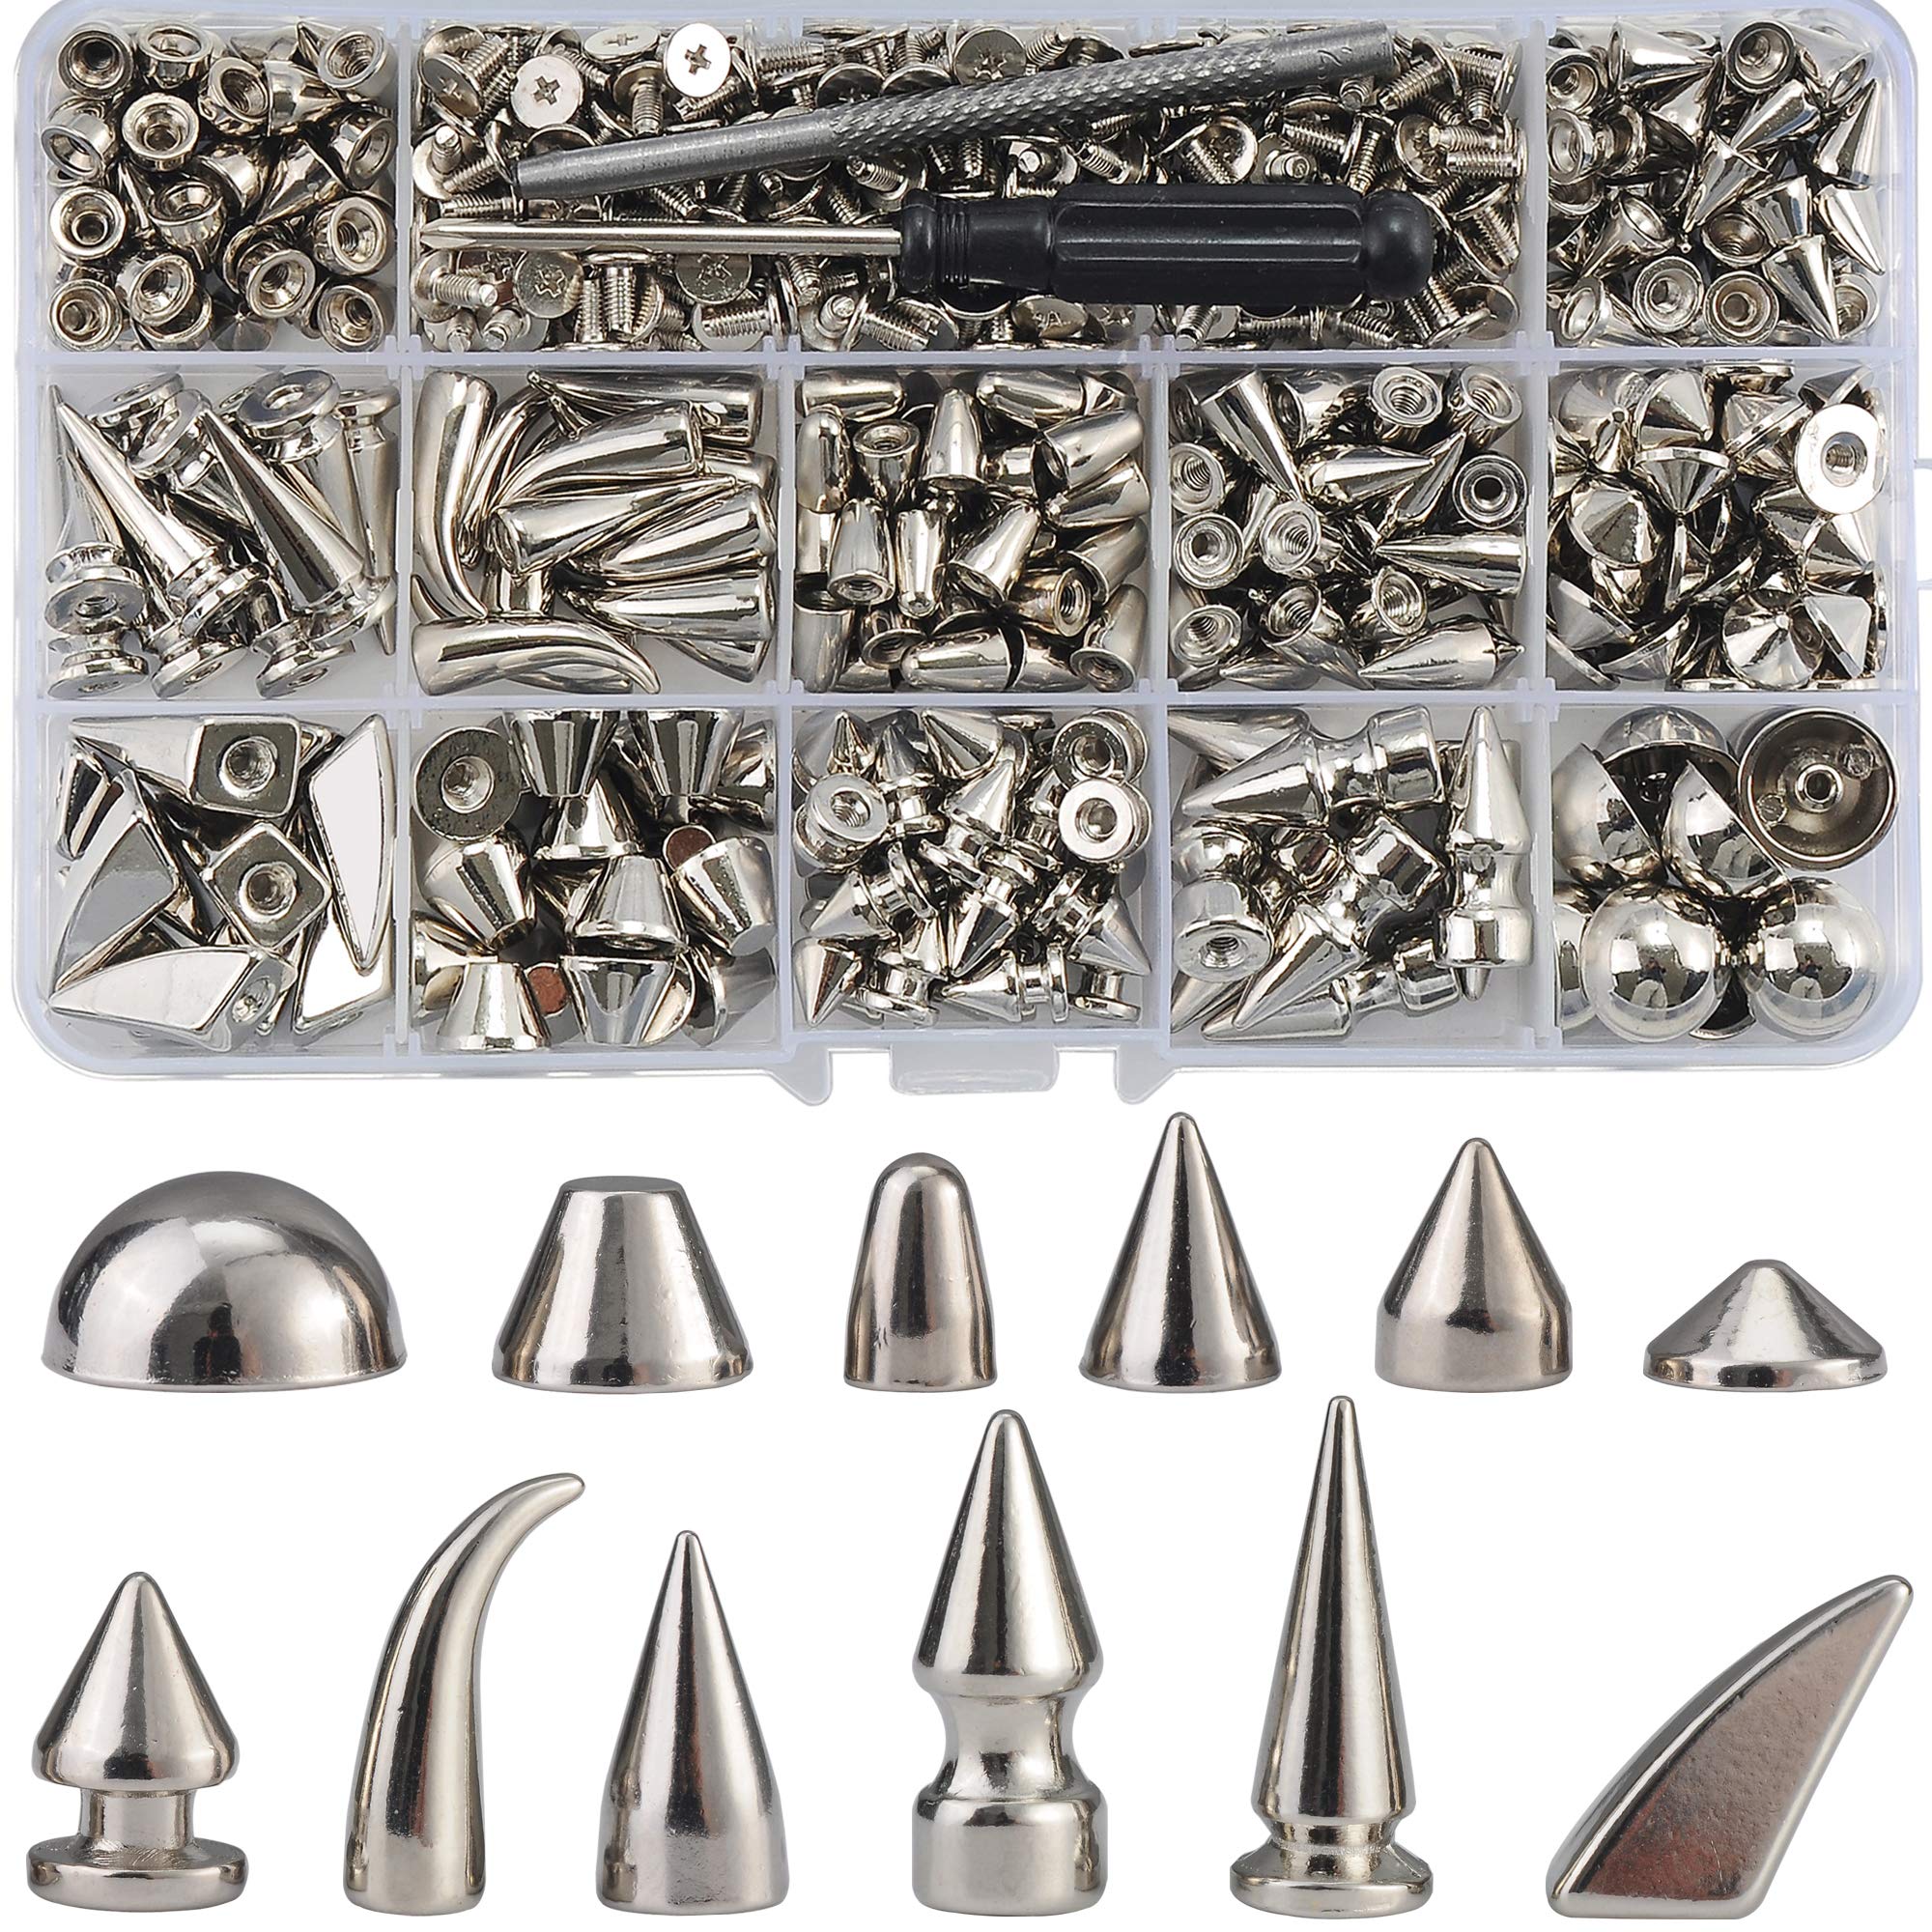 YORANYO 70 Sets Mixed Shape Spikes and Studs Assorted Sizes Spike